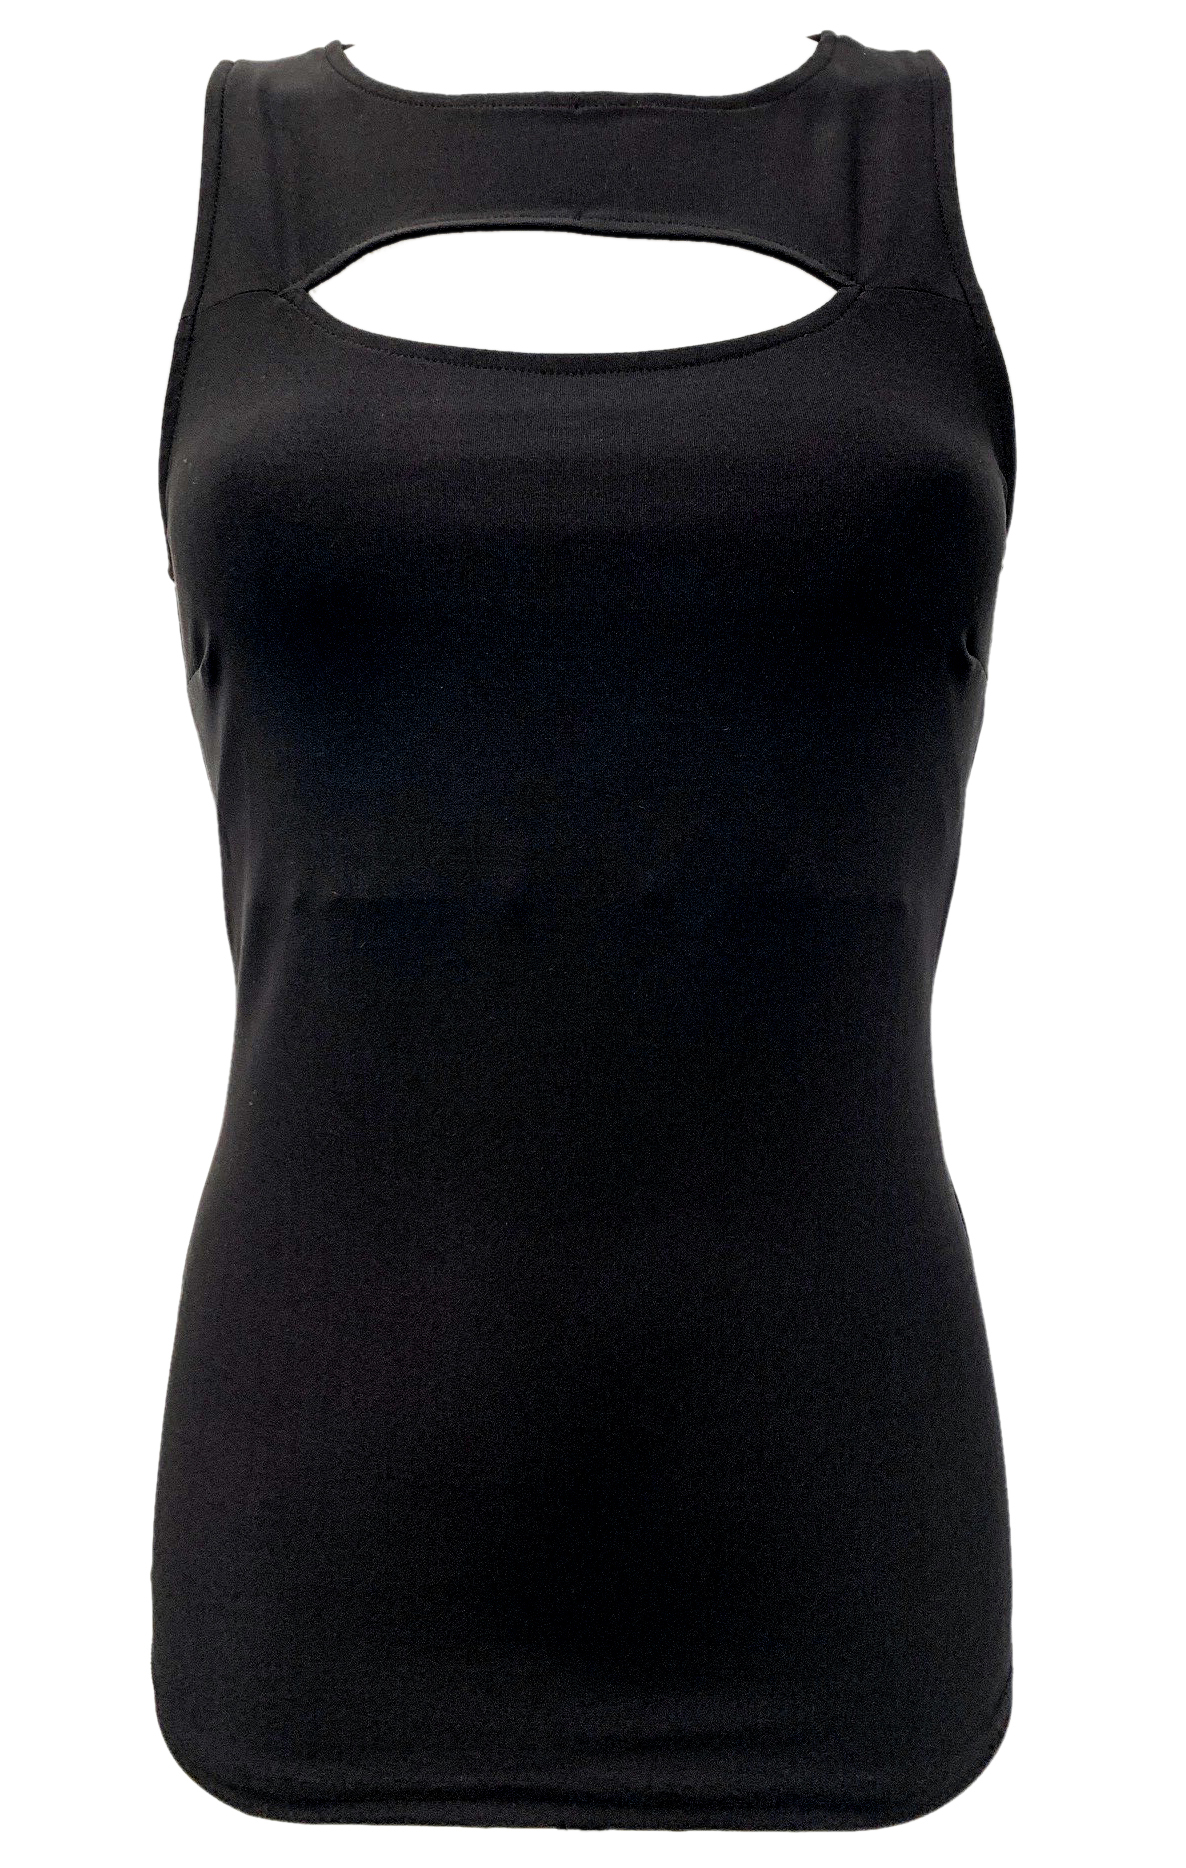 Ladies Cut-Out Top - BW-CBH02